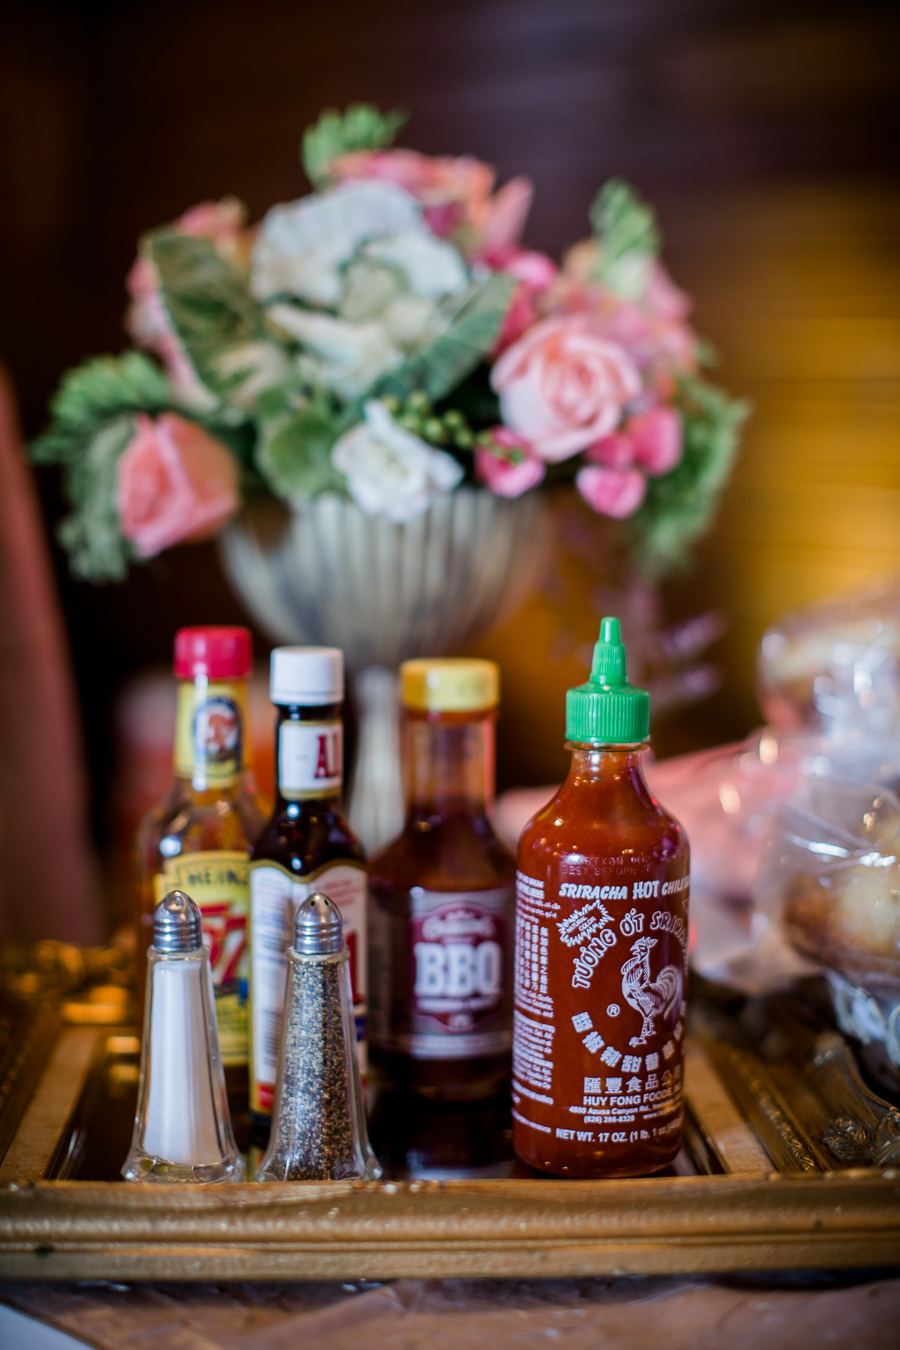 Copper Cellar sauce display at the open house of Knoxville Wedding Venue, Hunter Valley Farm, by Knoxville Wedding Photographer, Amanda May Photos.